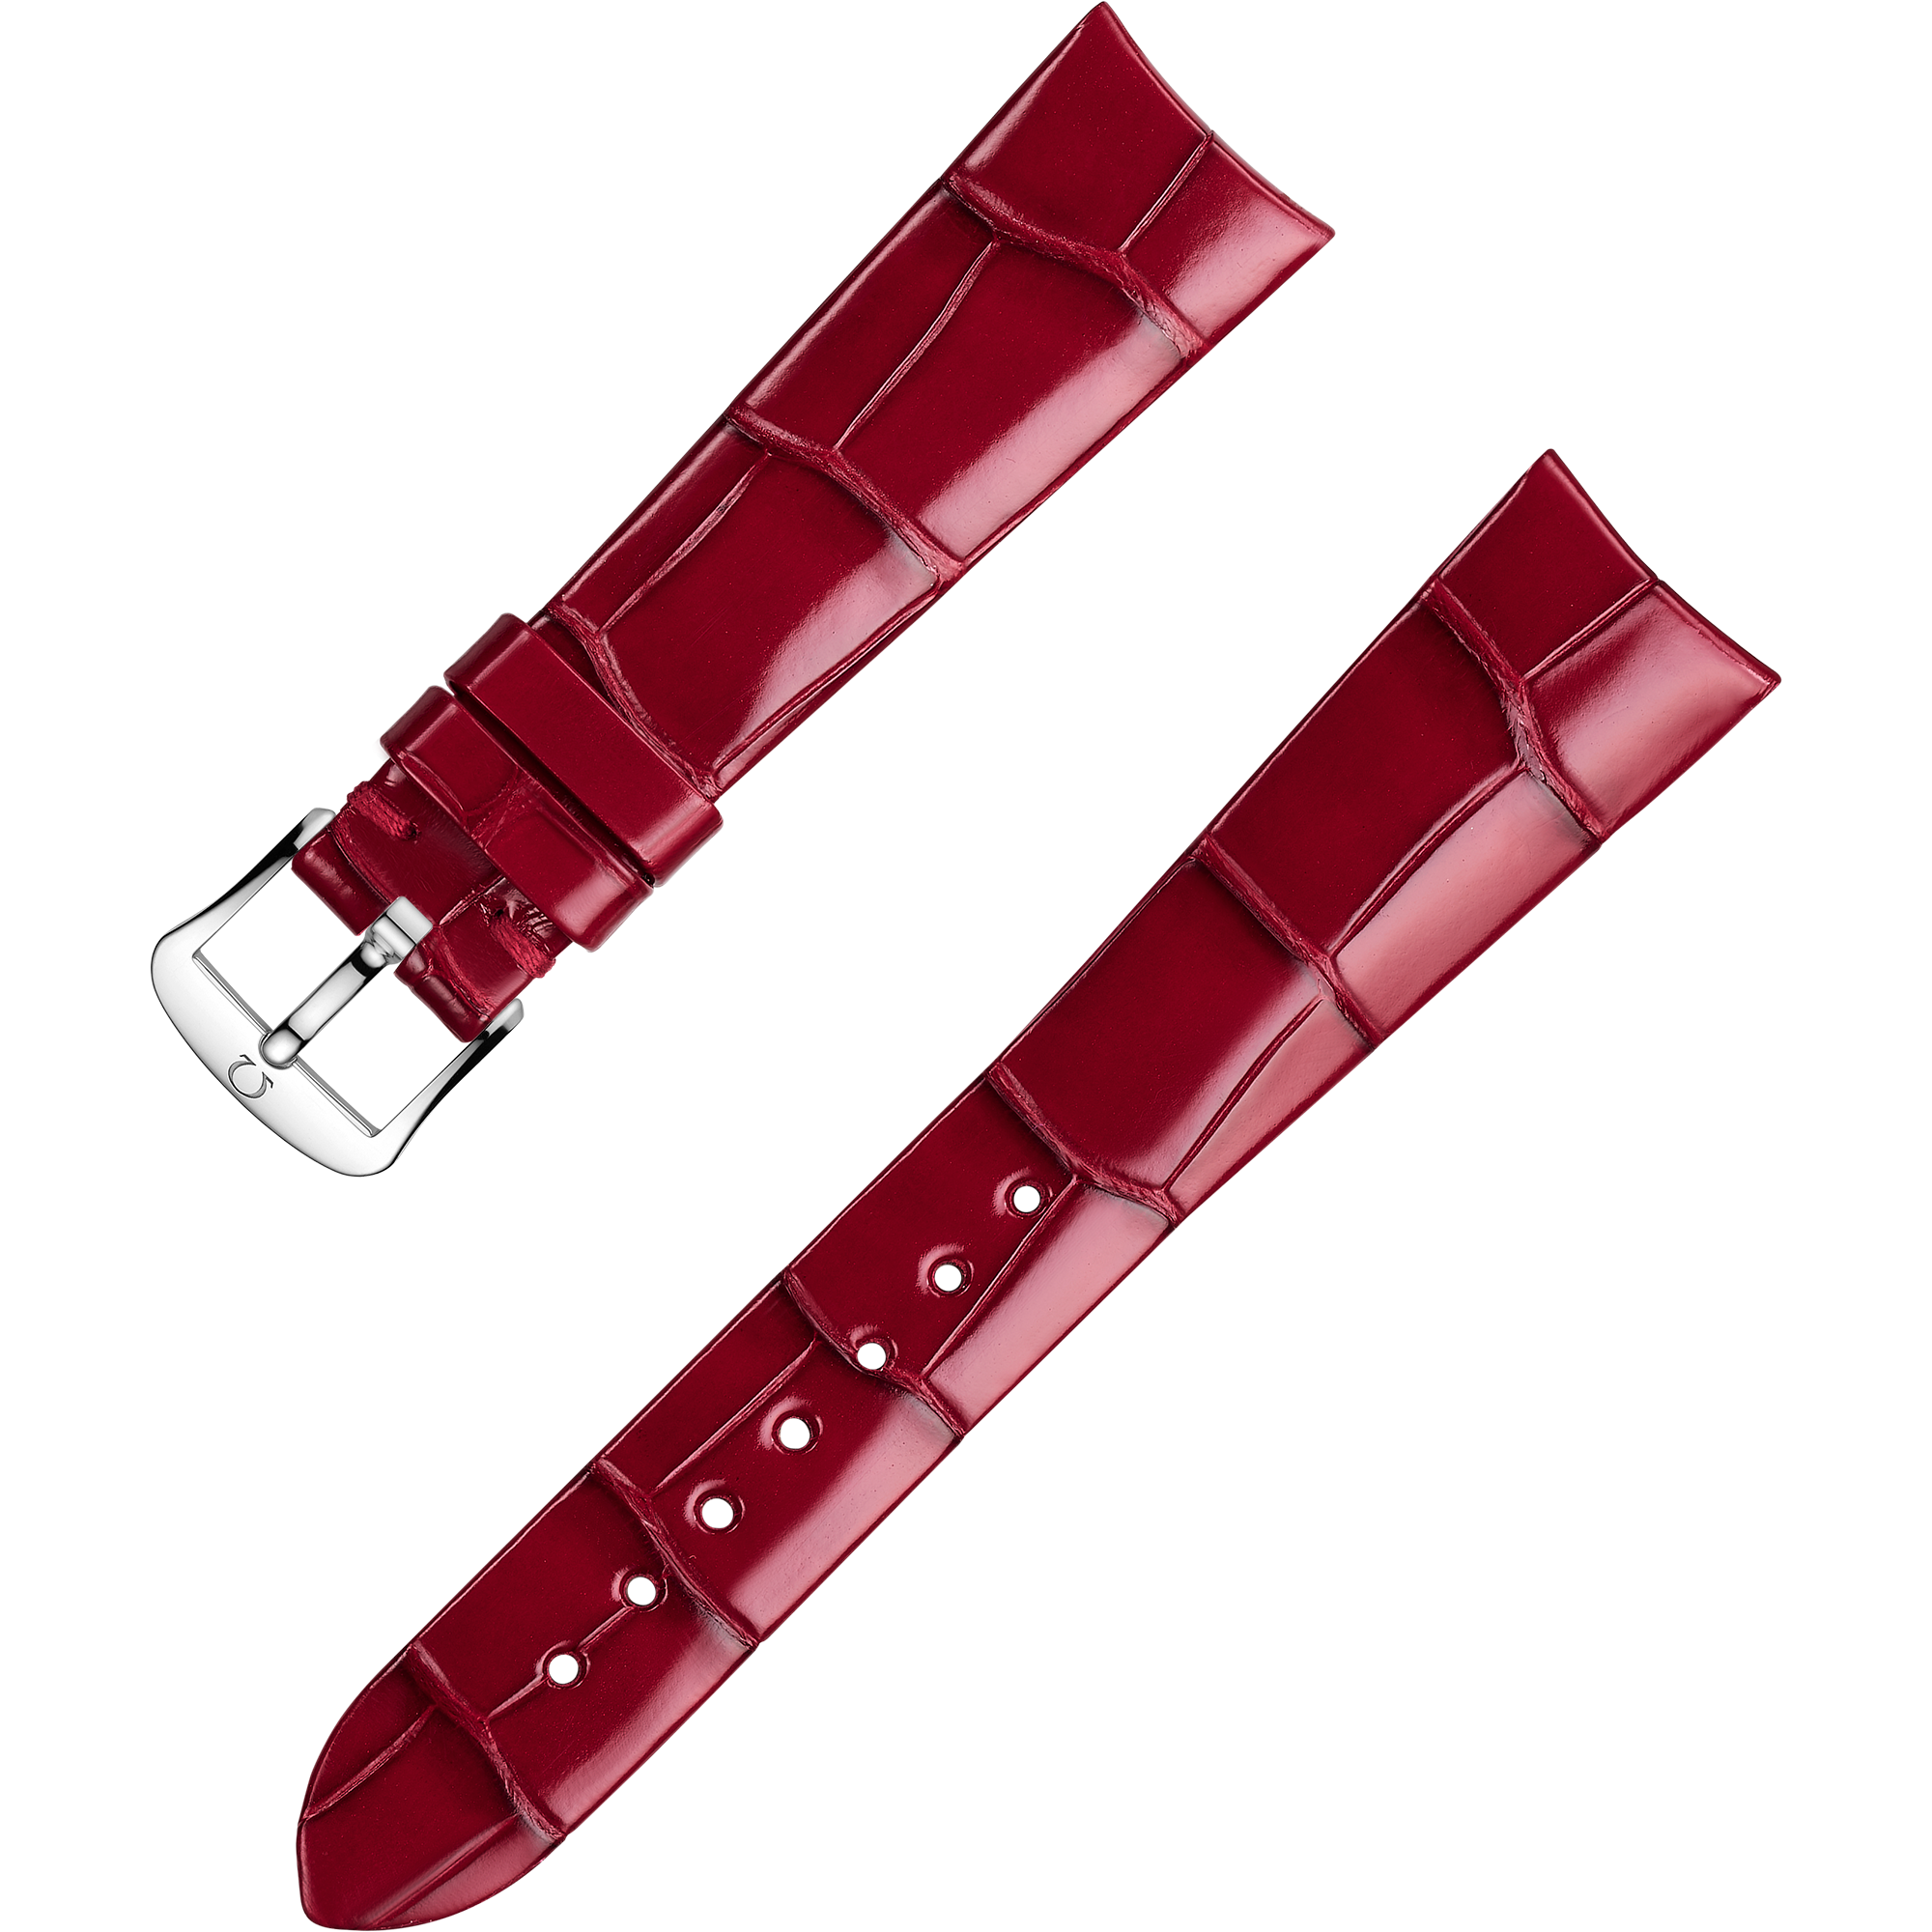 Two-piece strap - Red alligator leather strap with pin buckle - 032CUZ012325W